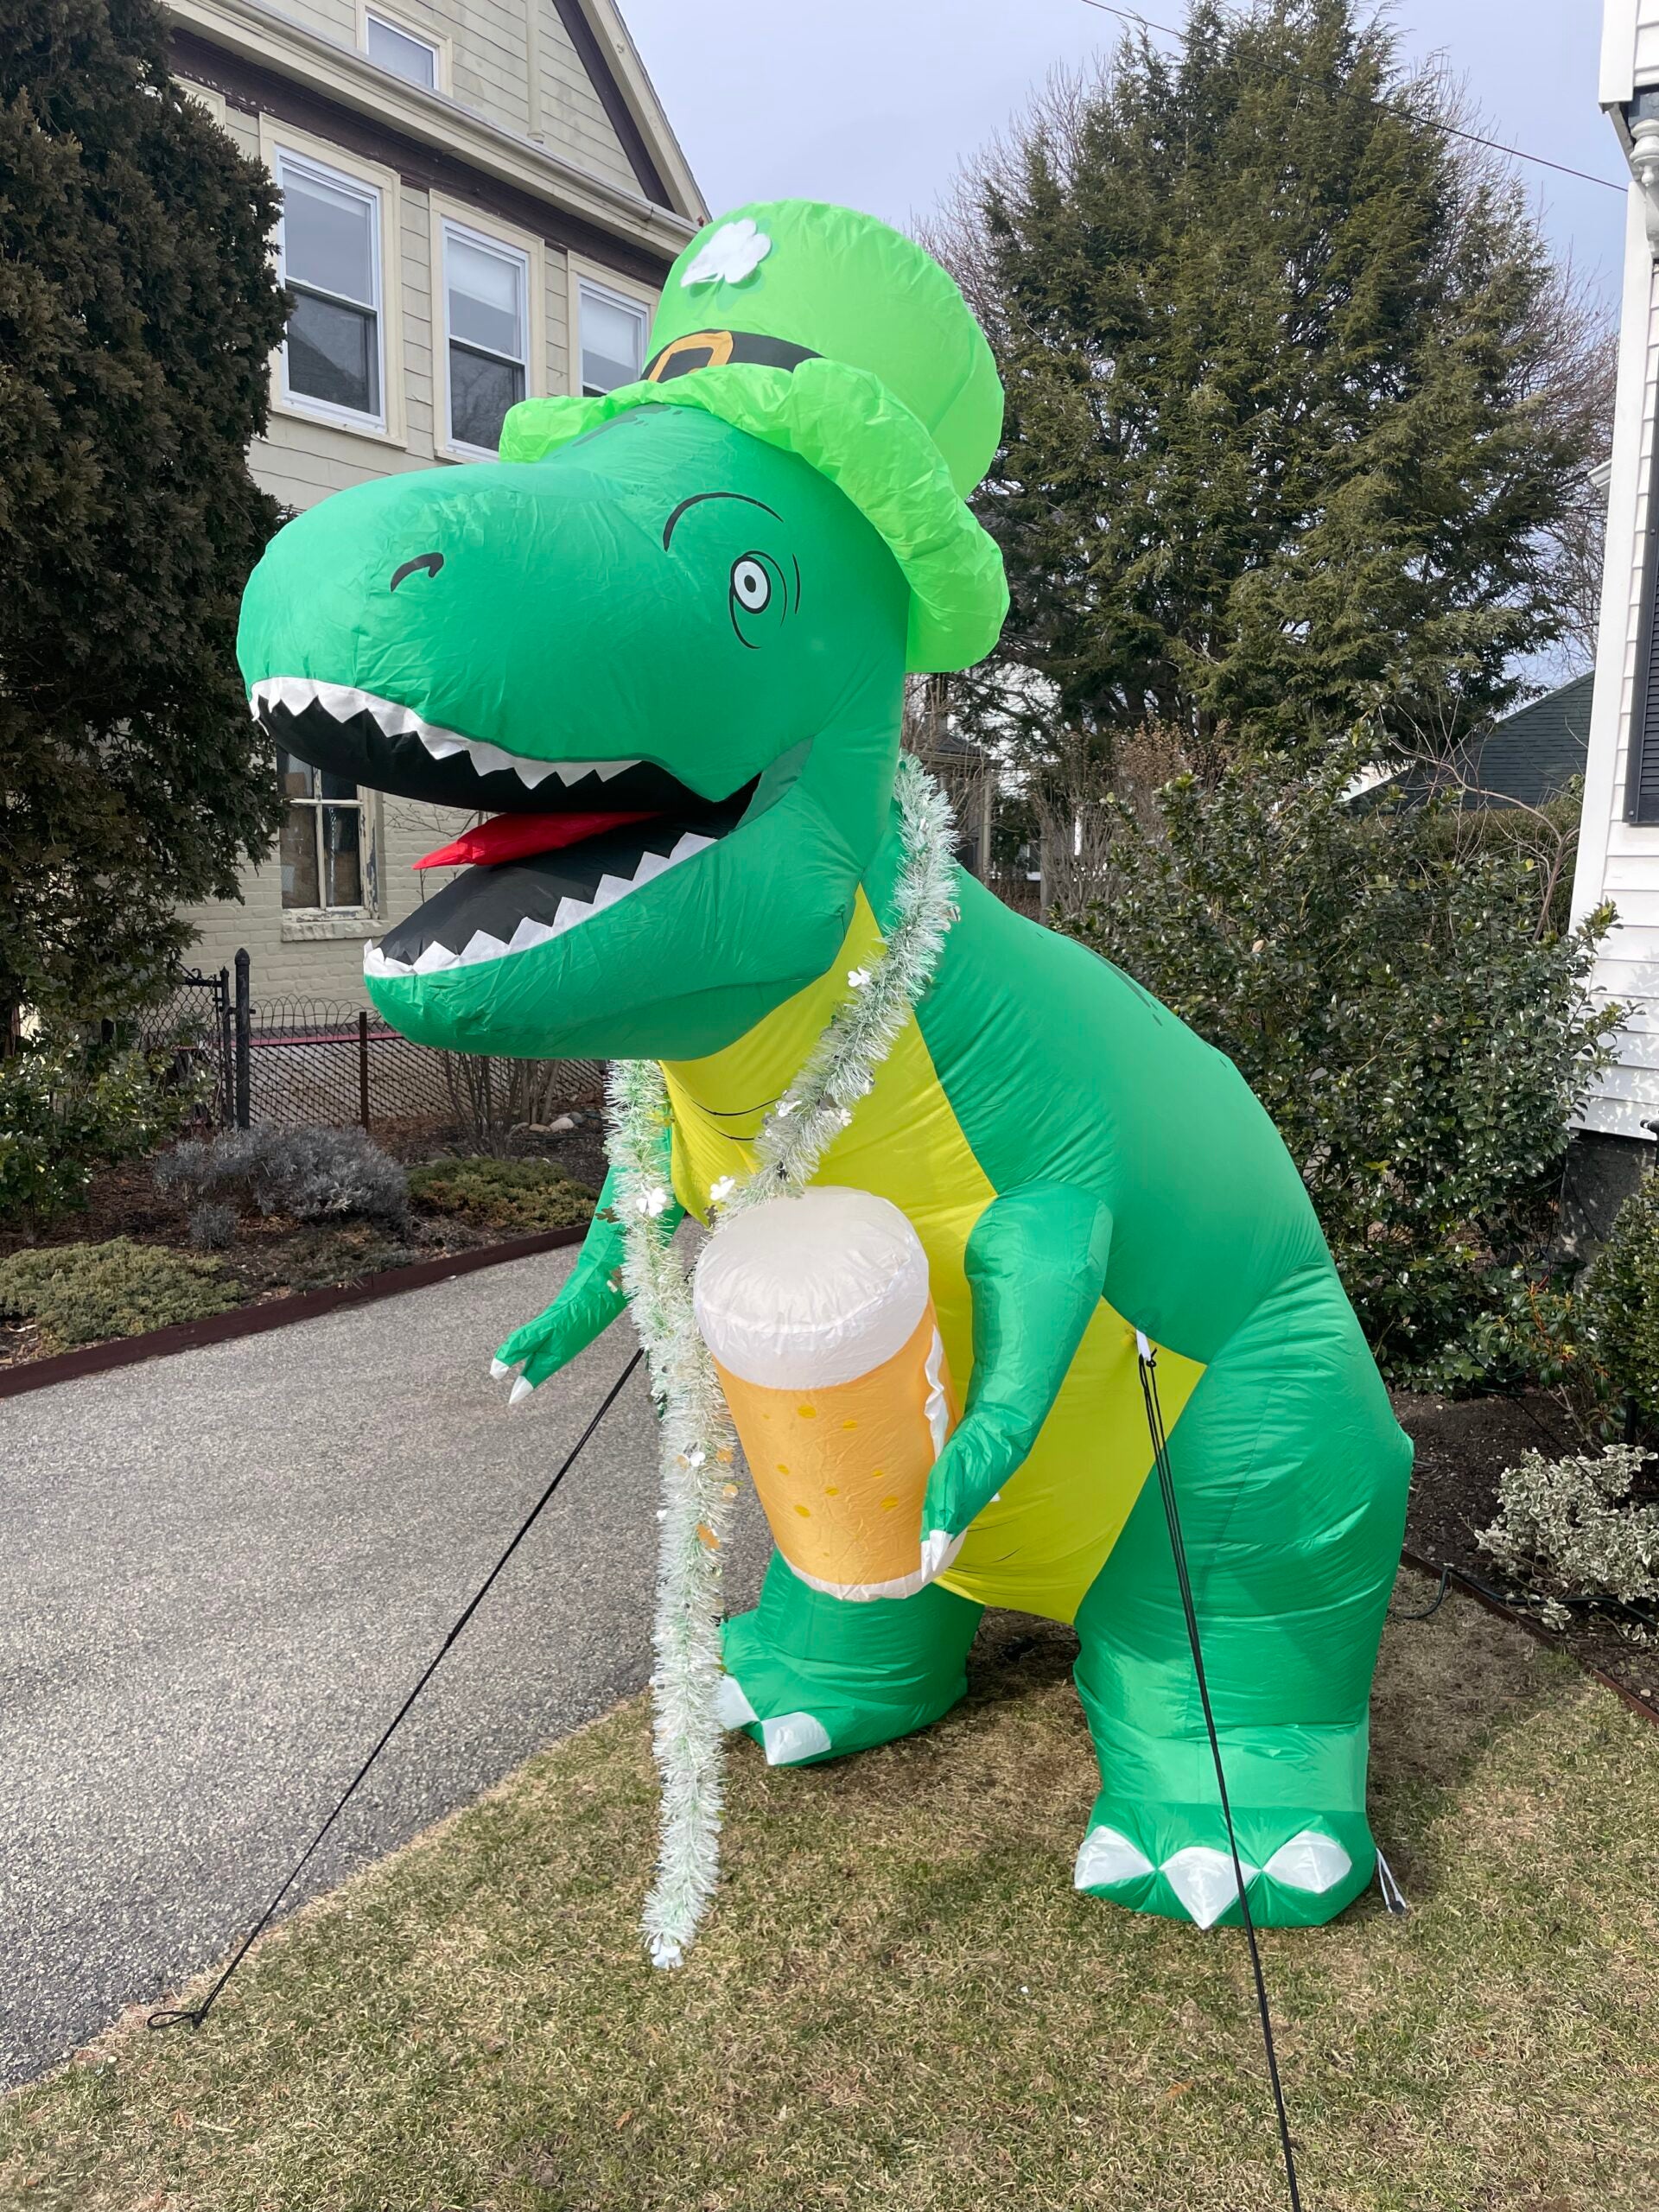 An inflatable dinosaur wearing a shamrock hat and holding a mug of beer.